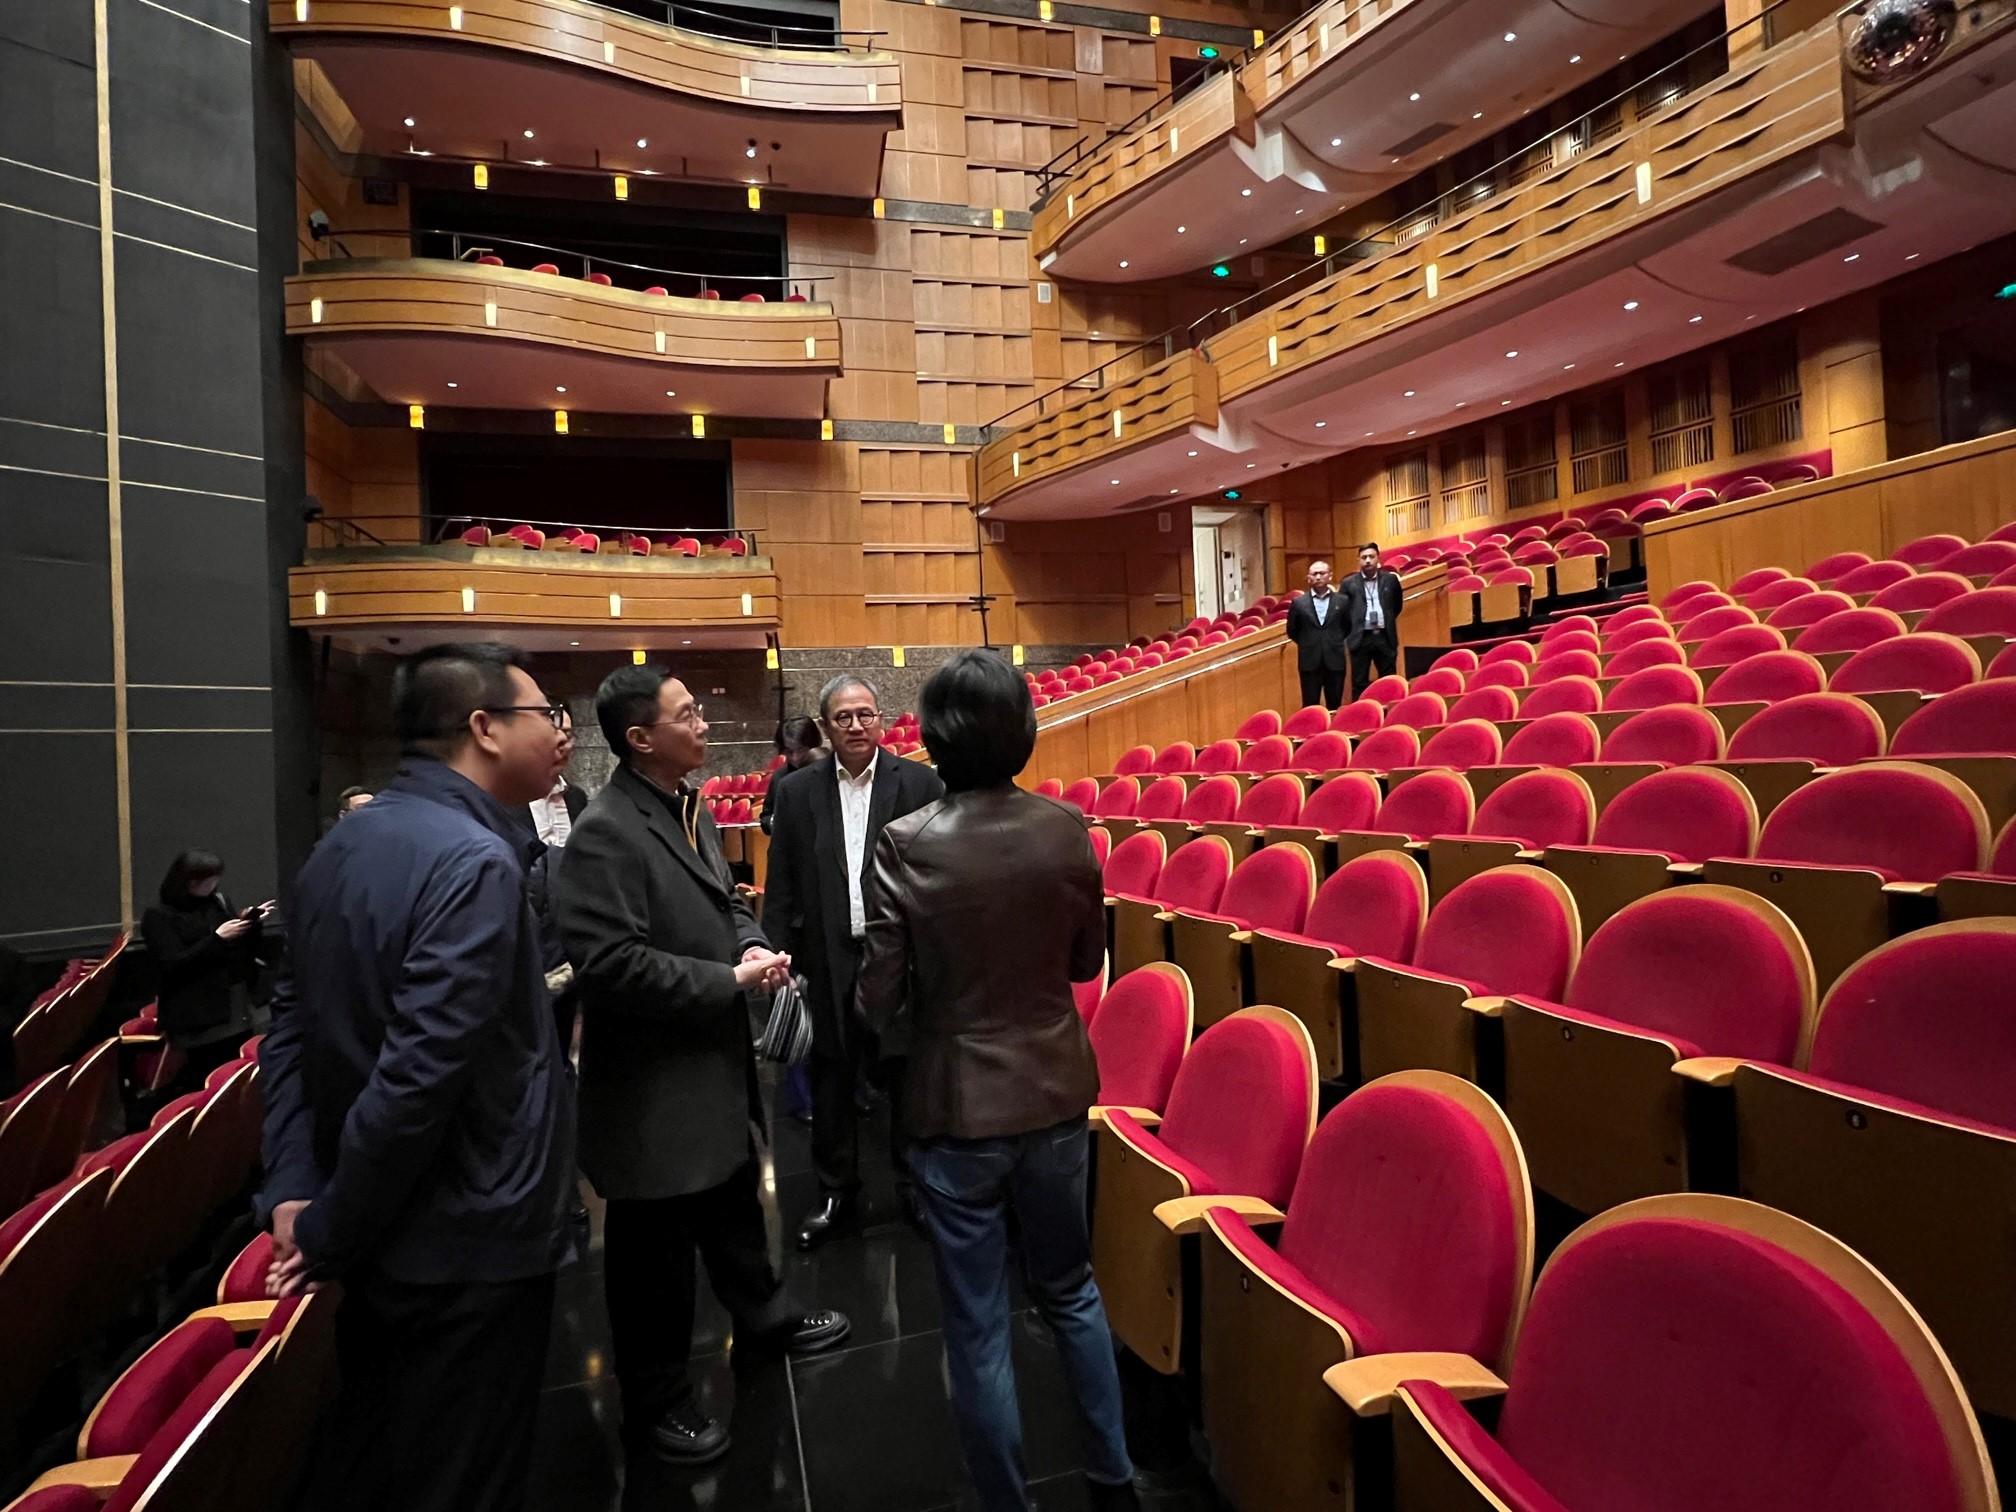 The Secretary for Culture, Sports and Tourism, Mr Kevin Yeung (second left), visits the Shanghai Grand Theatre today (January 8) to learn more about the venues and facilities for performing arts groups at Shanghai. The Permanent Secretary for Culture, Sports and Tourism, Mr Joe Wong (third left), also joined.